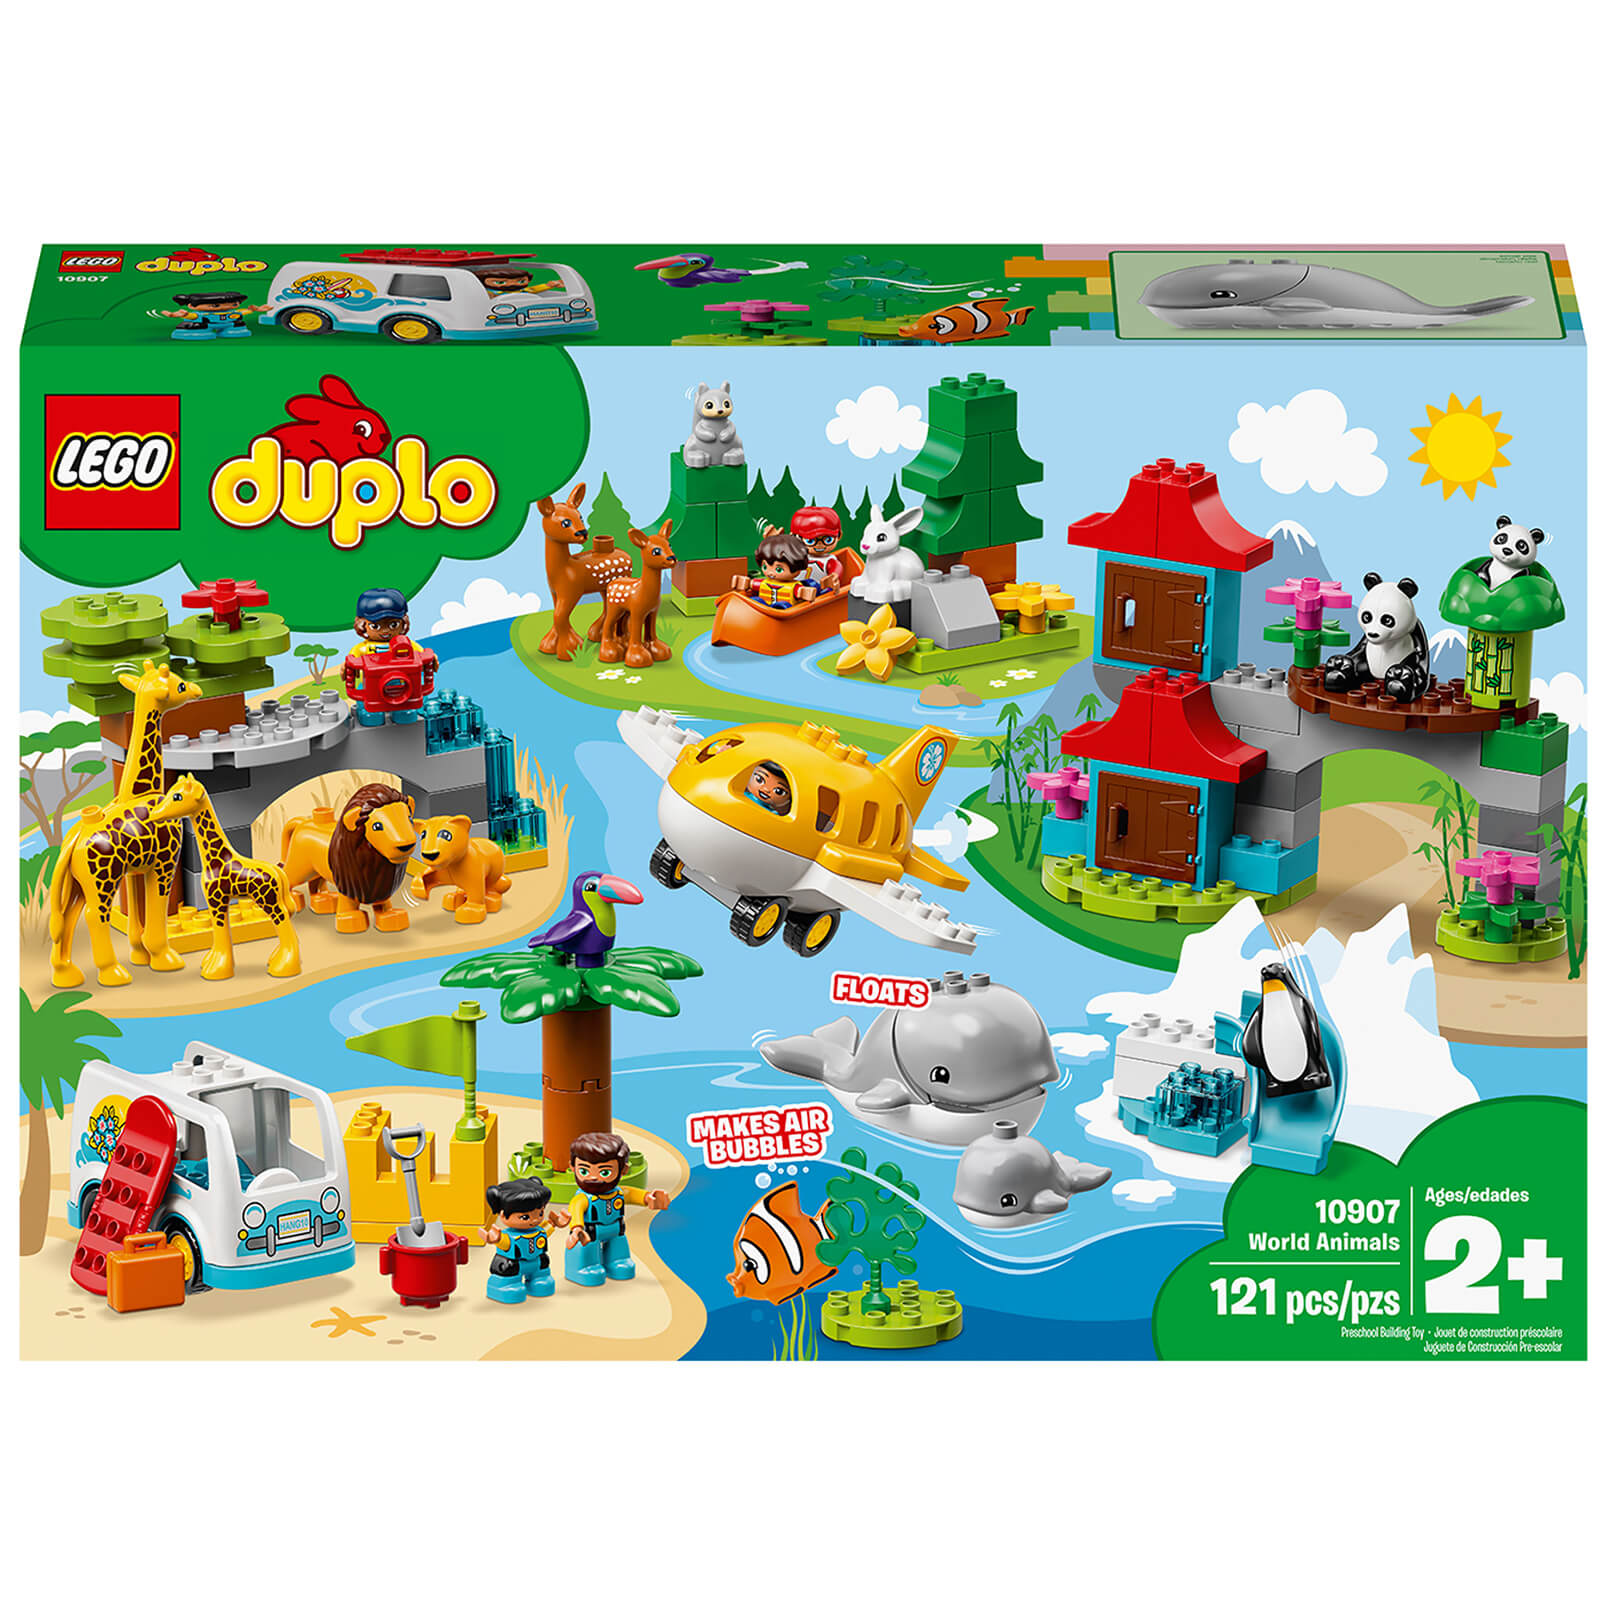 LEGO DUPLO Town: World Animals Toys for Toddlers (10907)